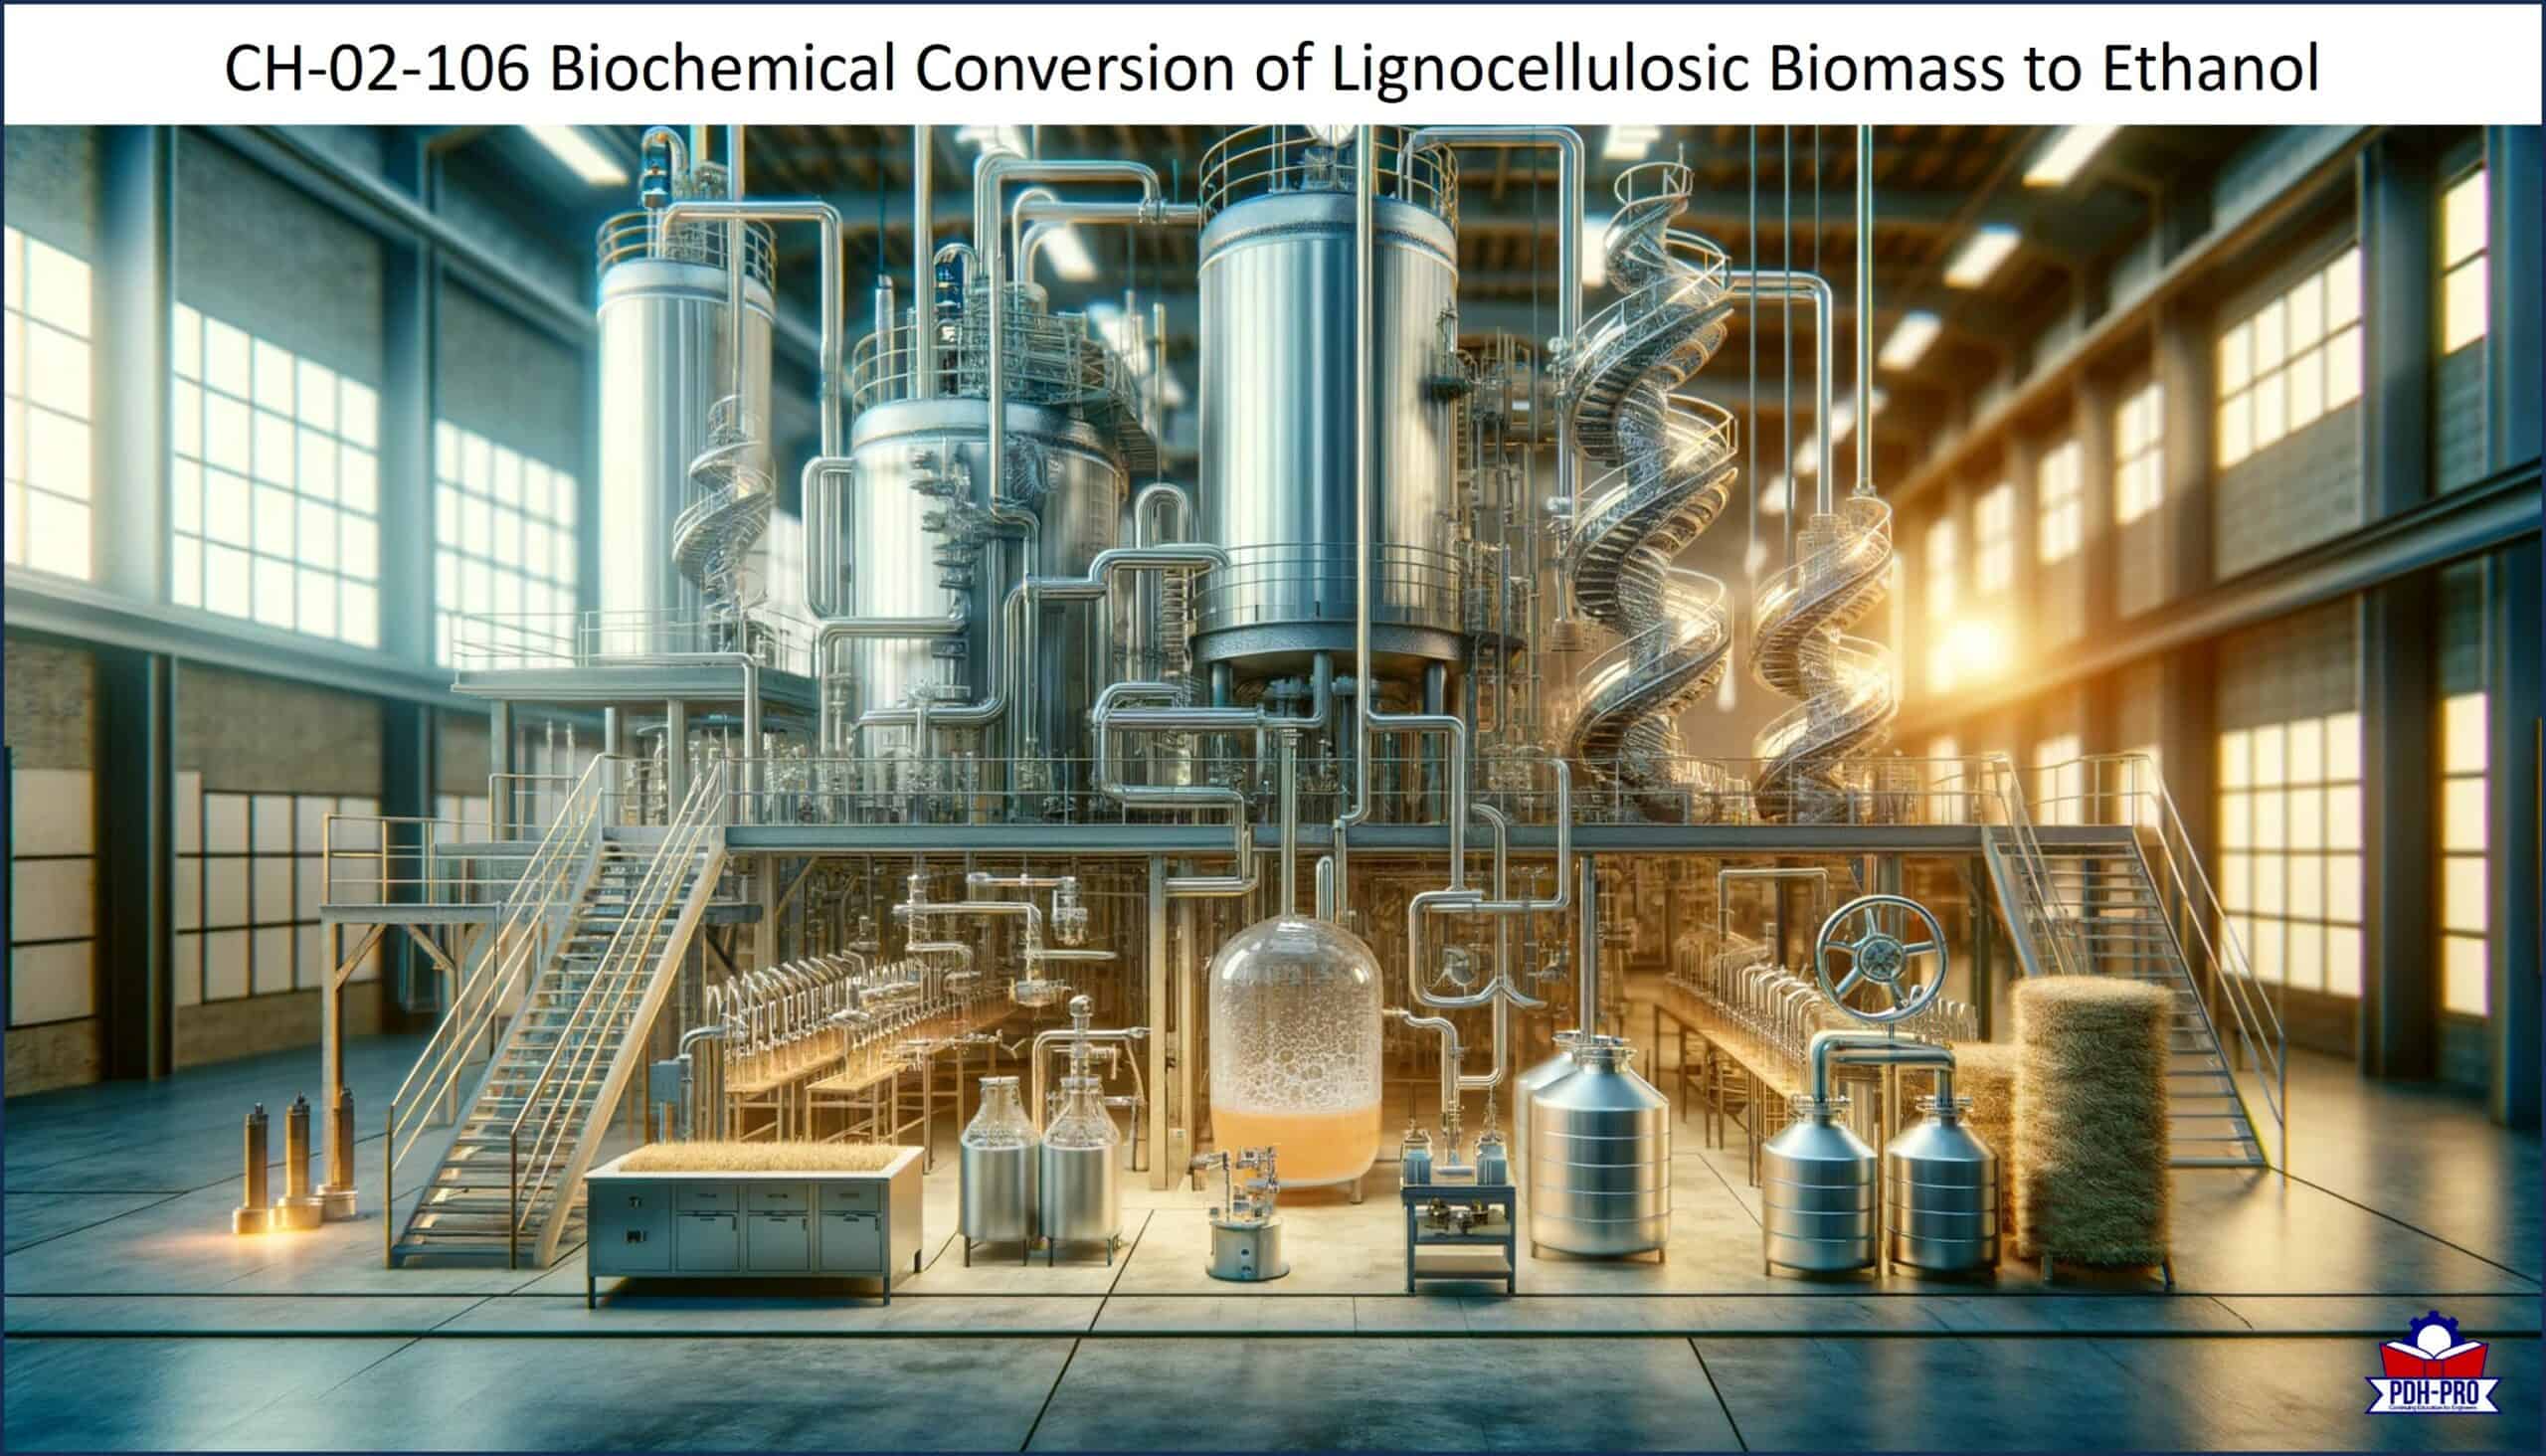 Biochemical Conversion of Lignocellulosic Biomass to Ethanol